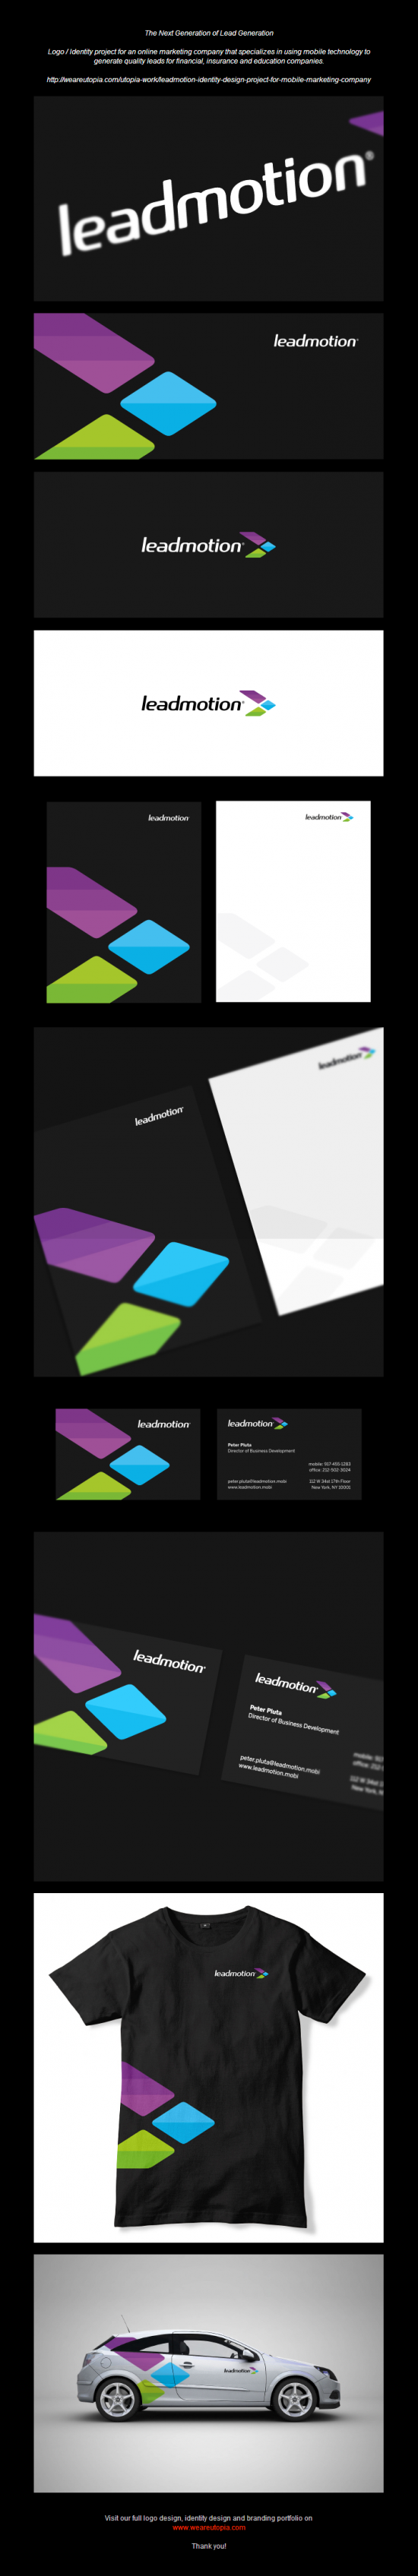 Leadmotion logo and corporate identity design by Utopia Branding Agency